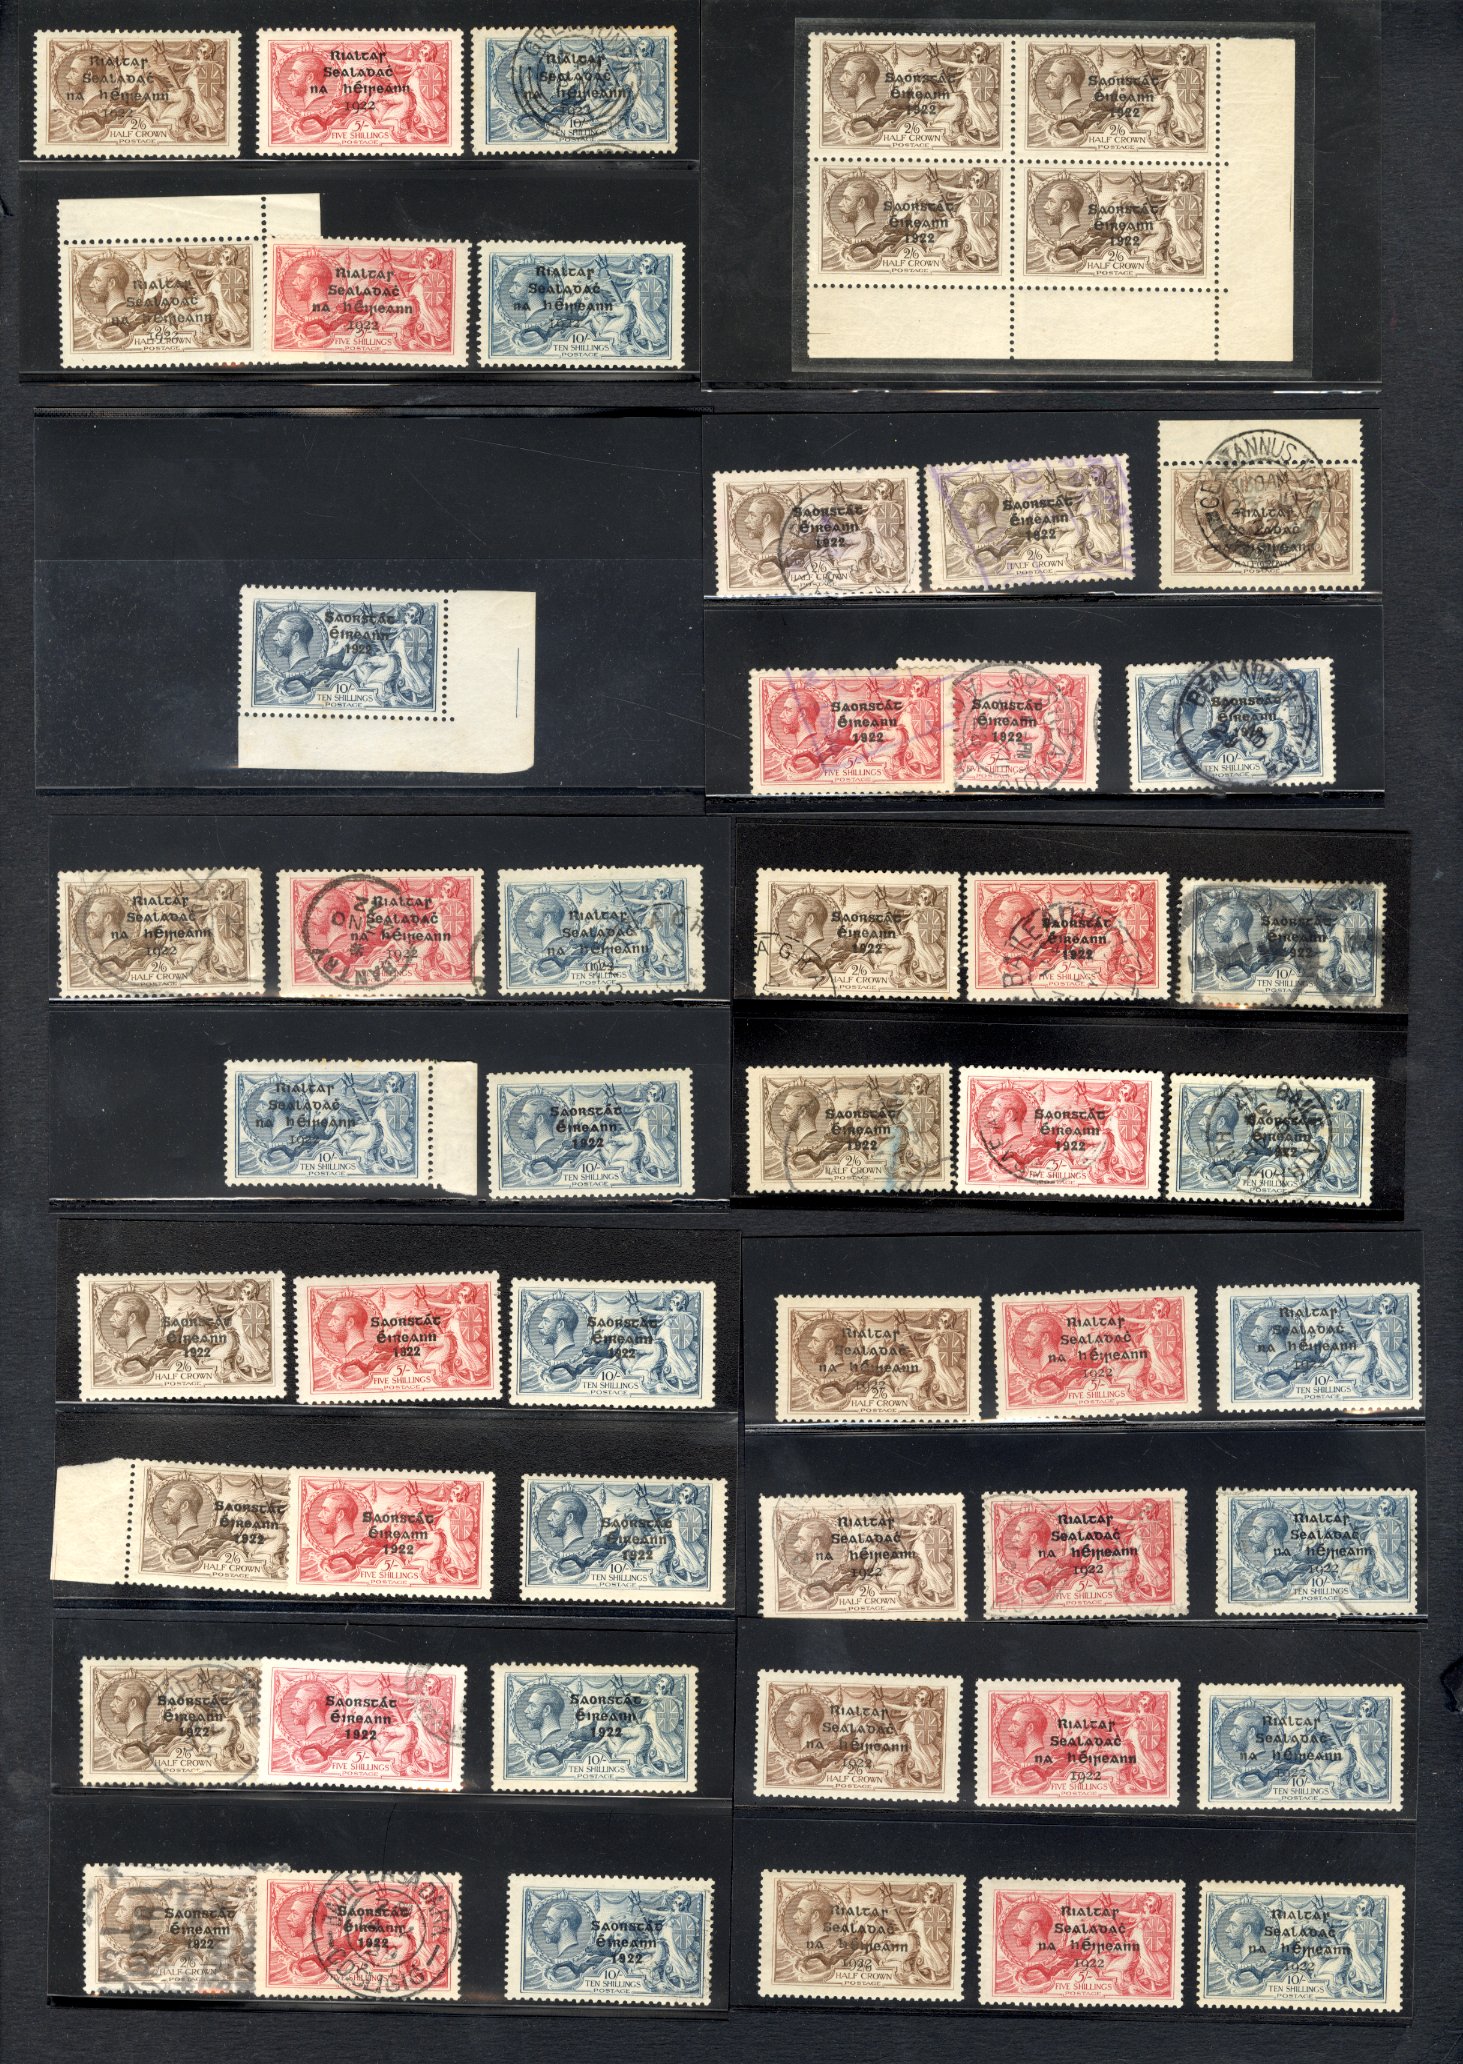 Lot 1488 - VATICAN CITY  Flight Covers  -  Cherrystone Auctions Rare Stamps & Postal History of the World